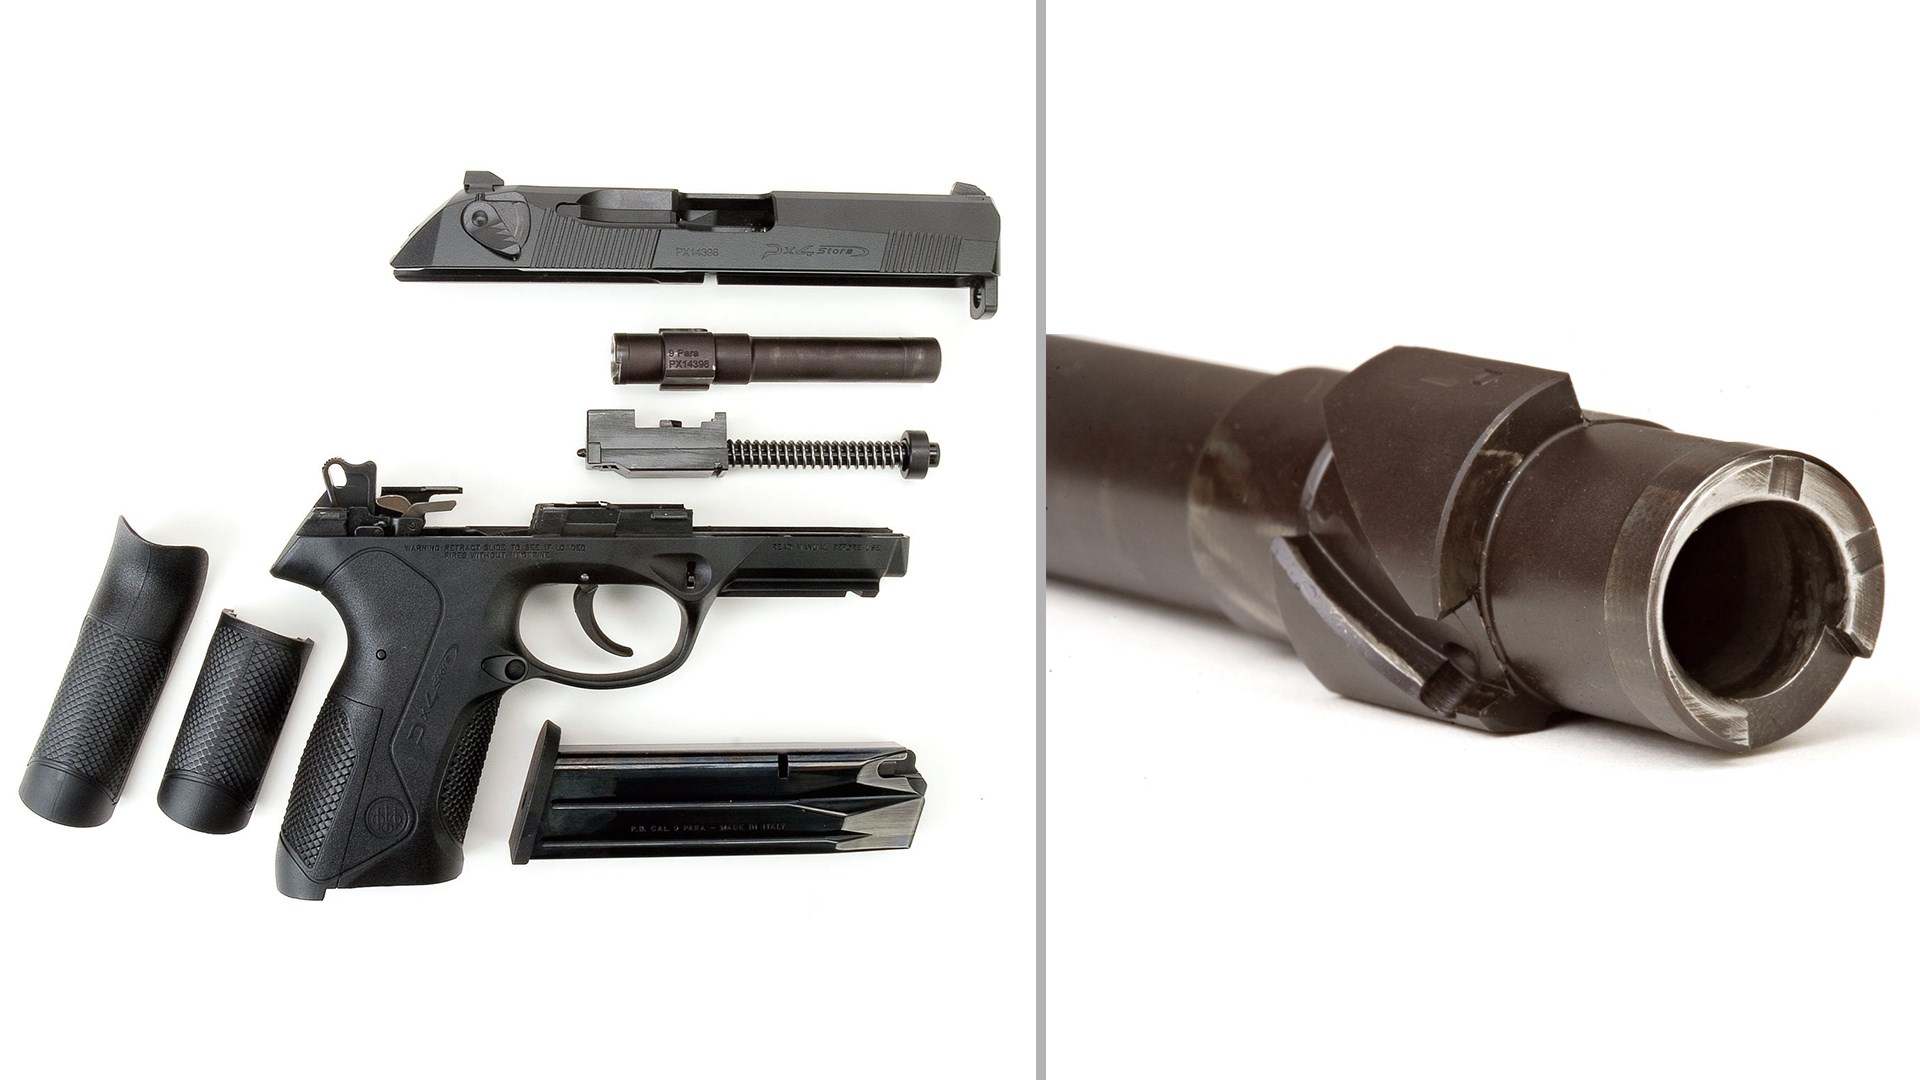 Close-up of the Beretta Px4 barrel and components of the pistol when fieldstripped gun parts